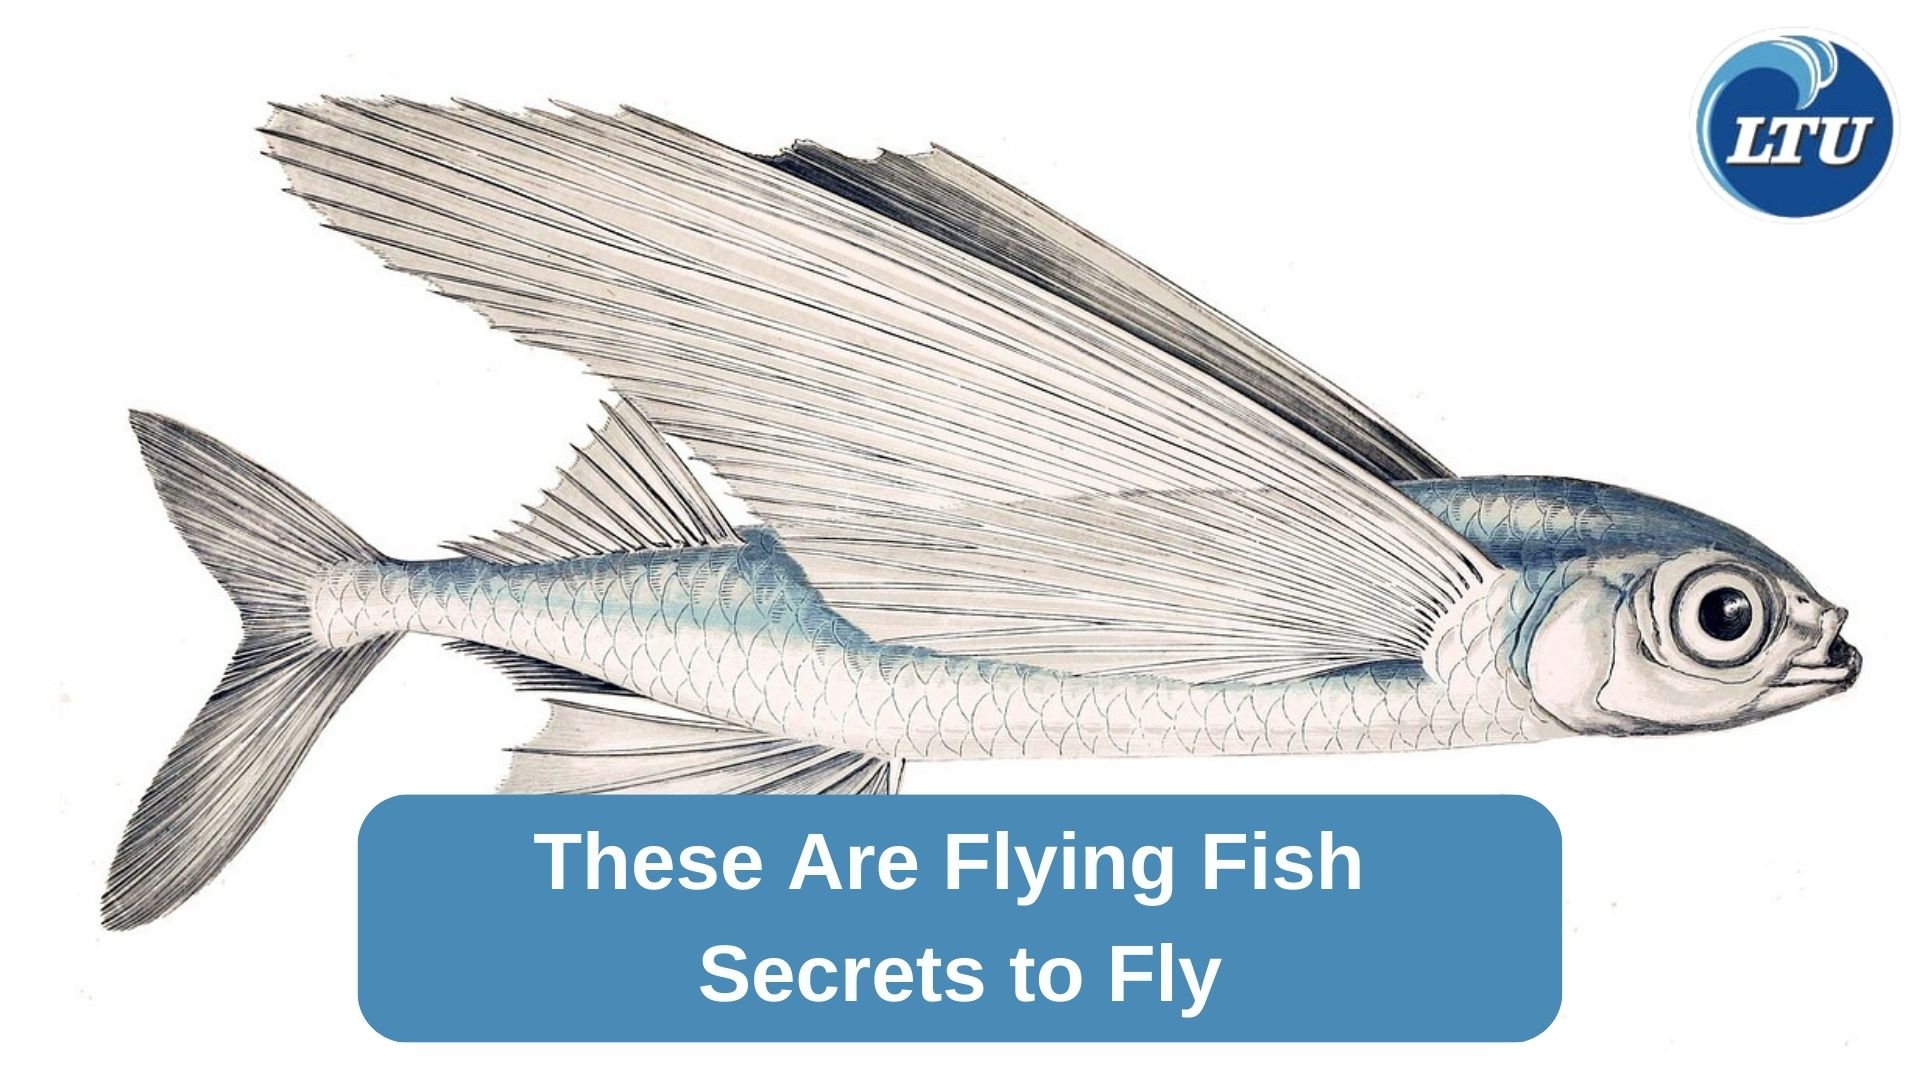 These Are Flying Fish Secret to Fly